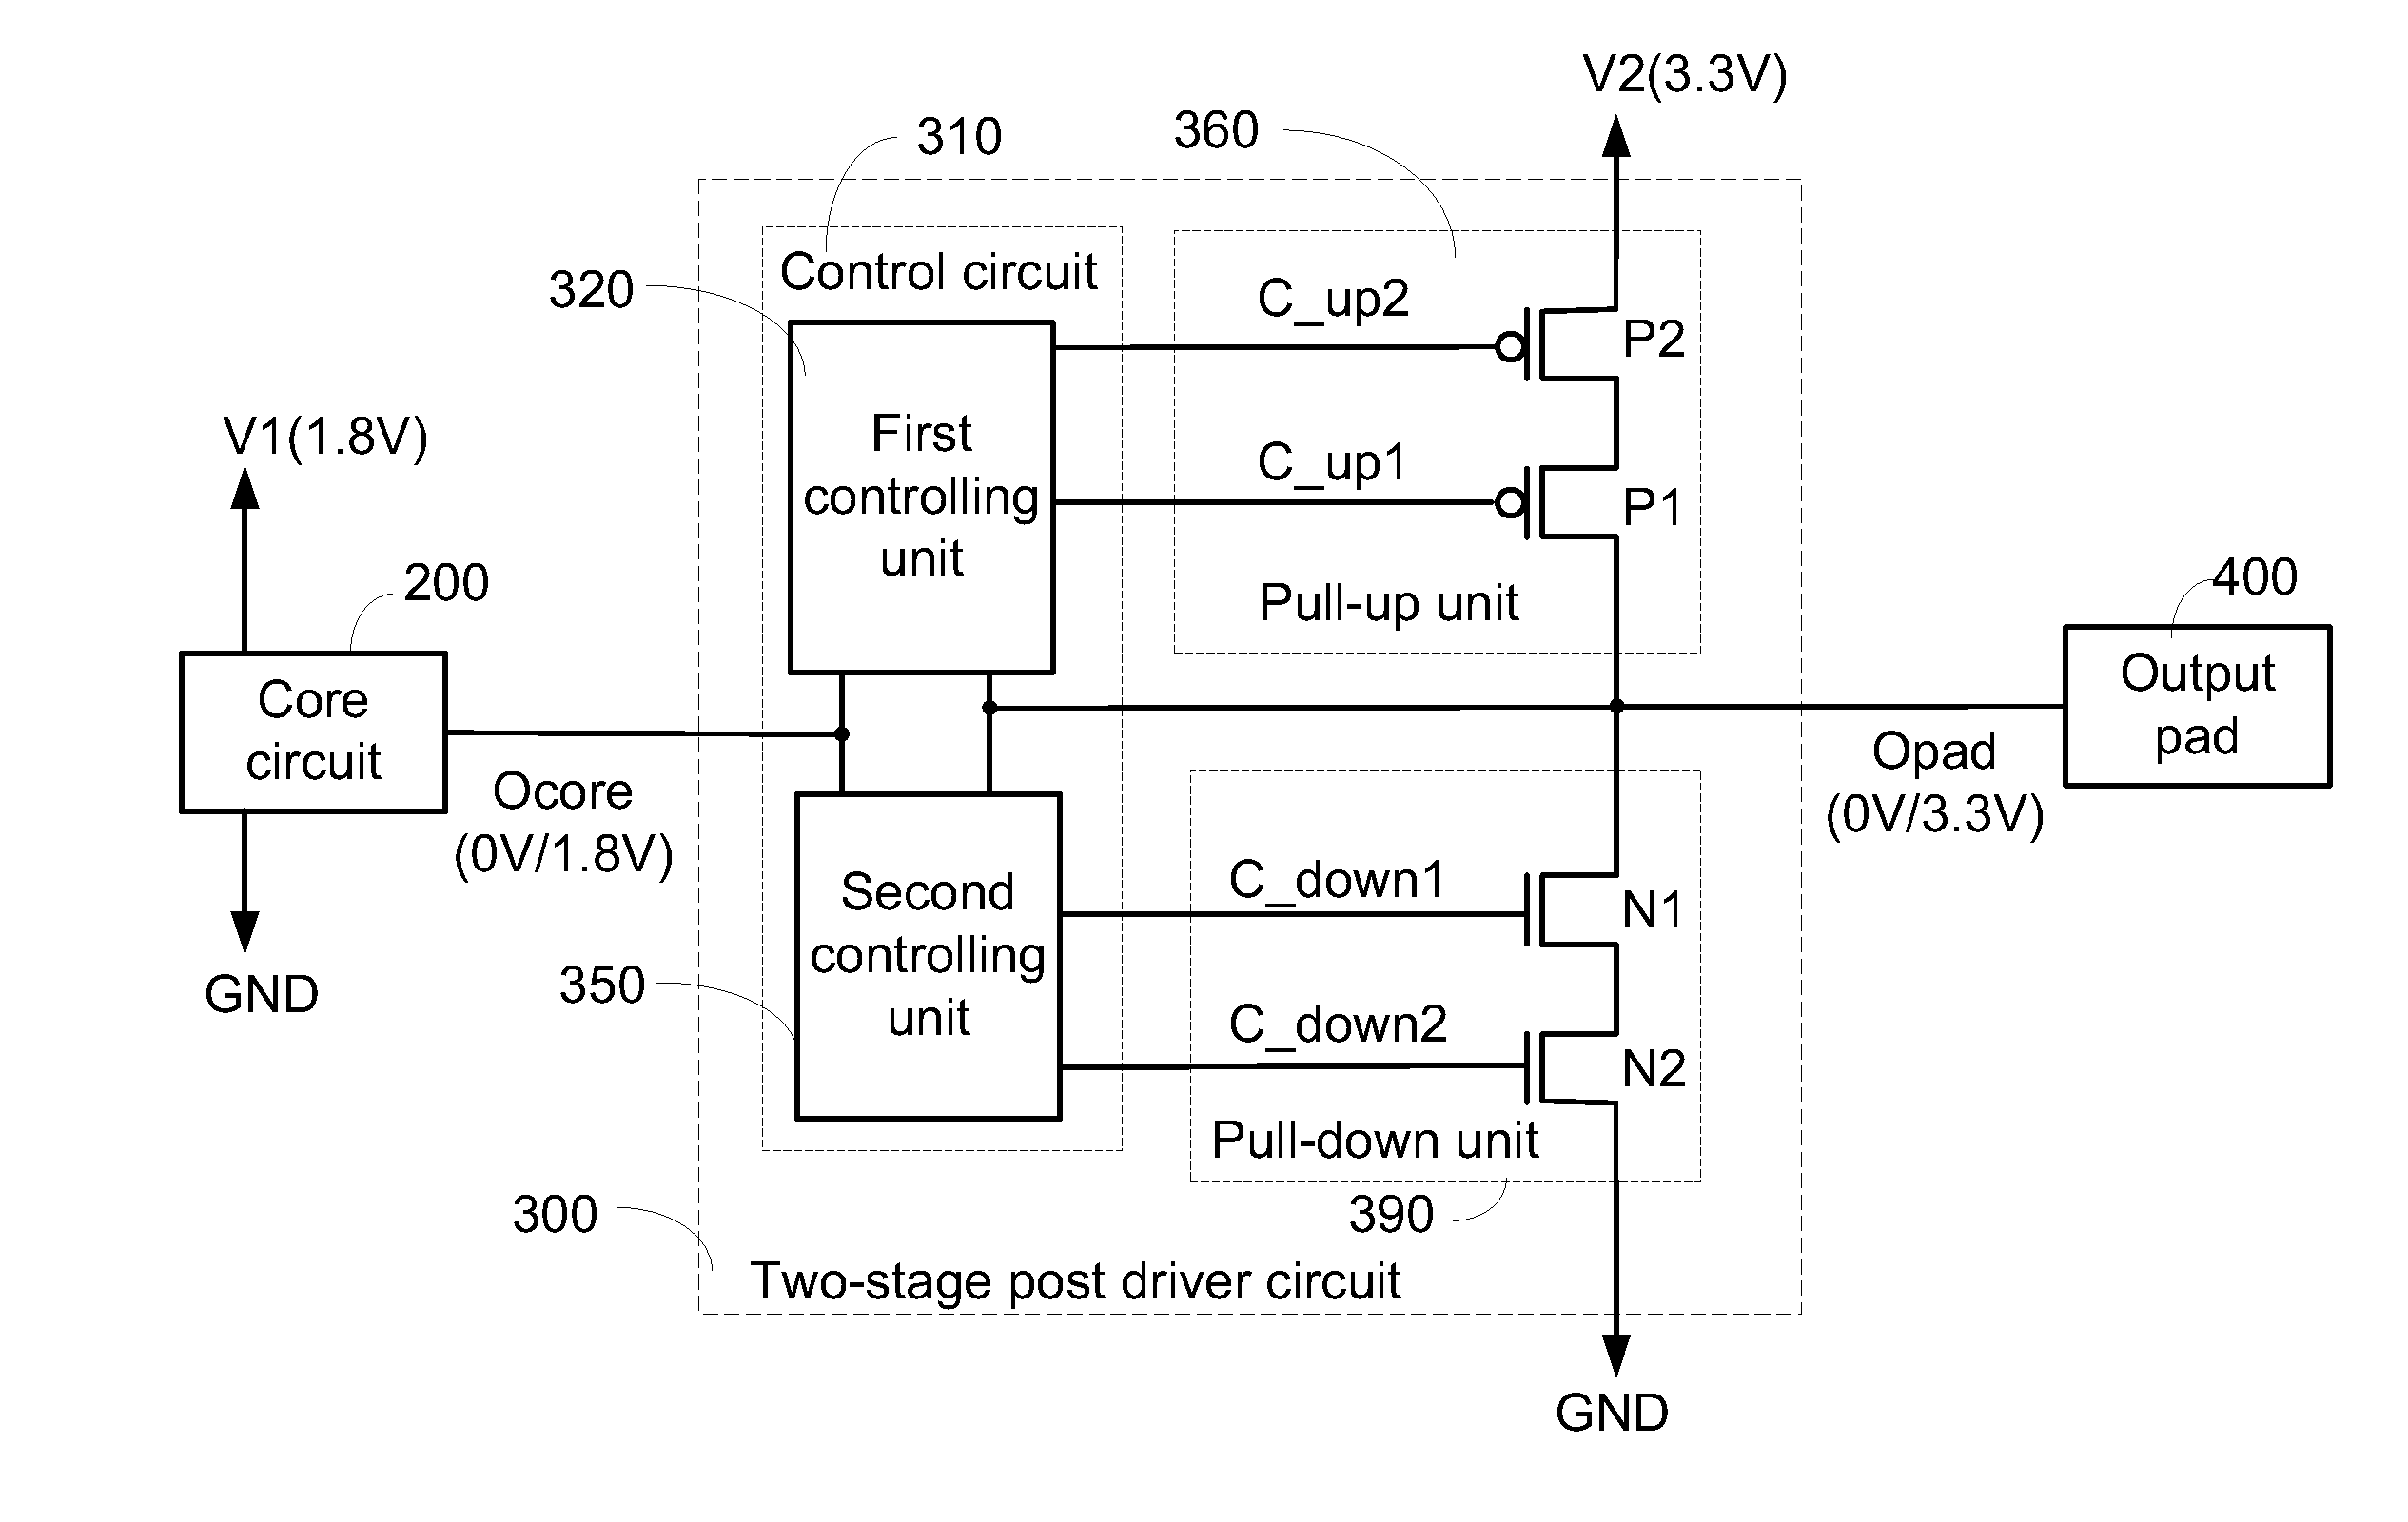 Two-stage post driver circuit